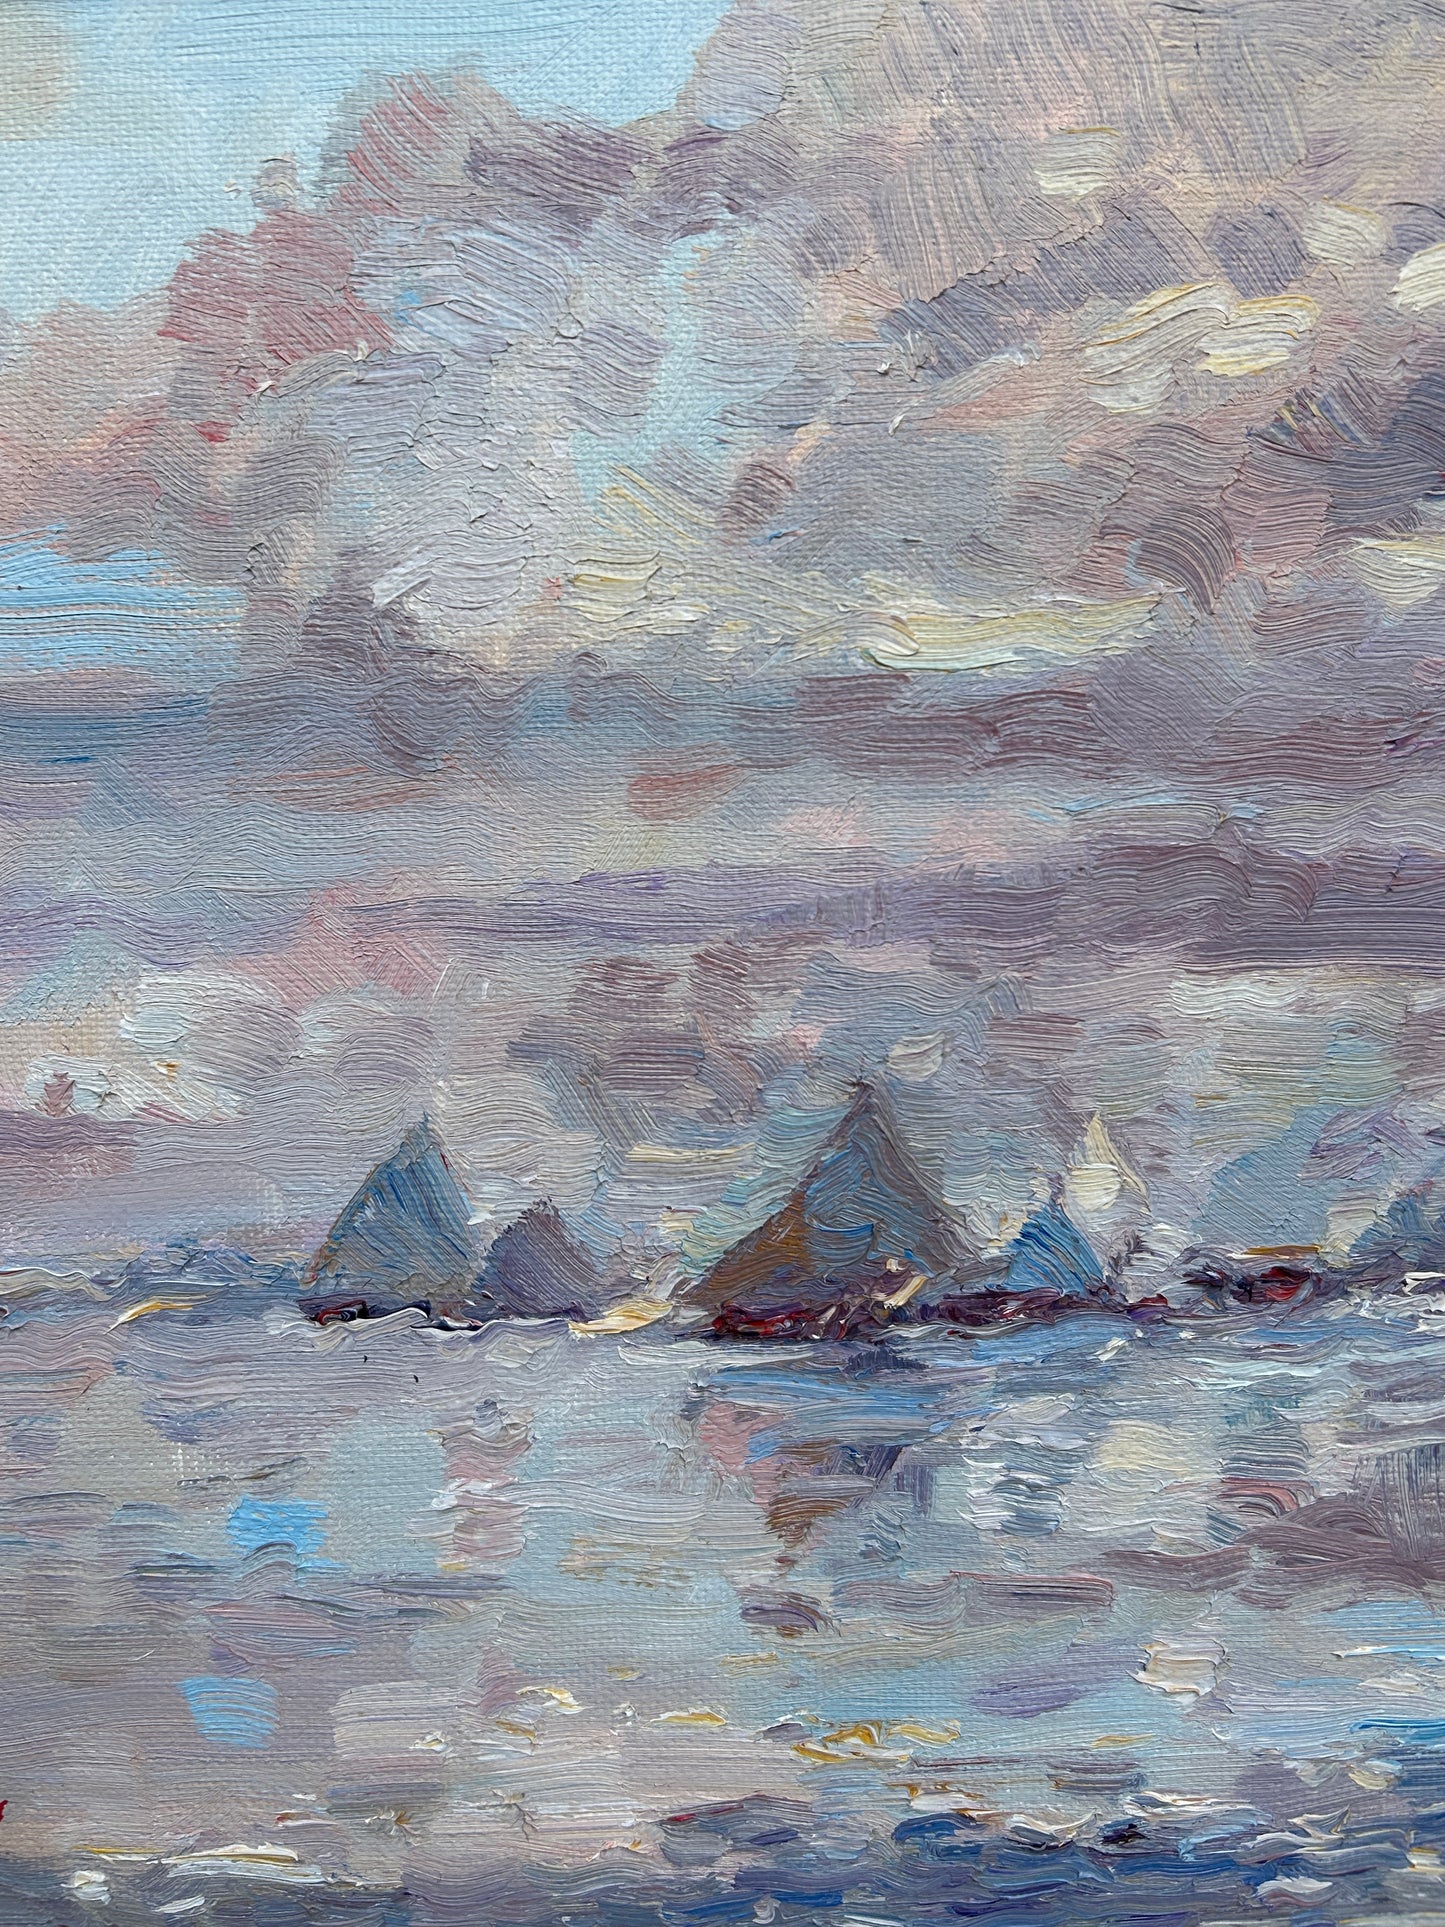 Charming oil on canvas "Sails" by the well listed art JD Henderson.